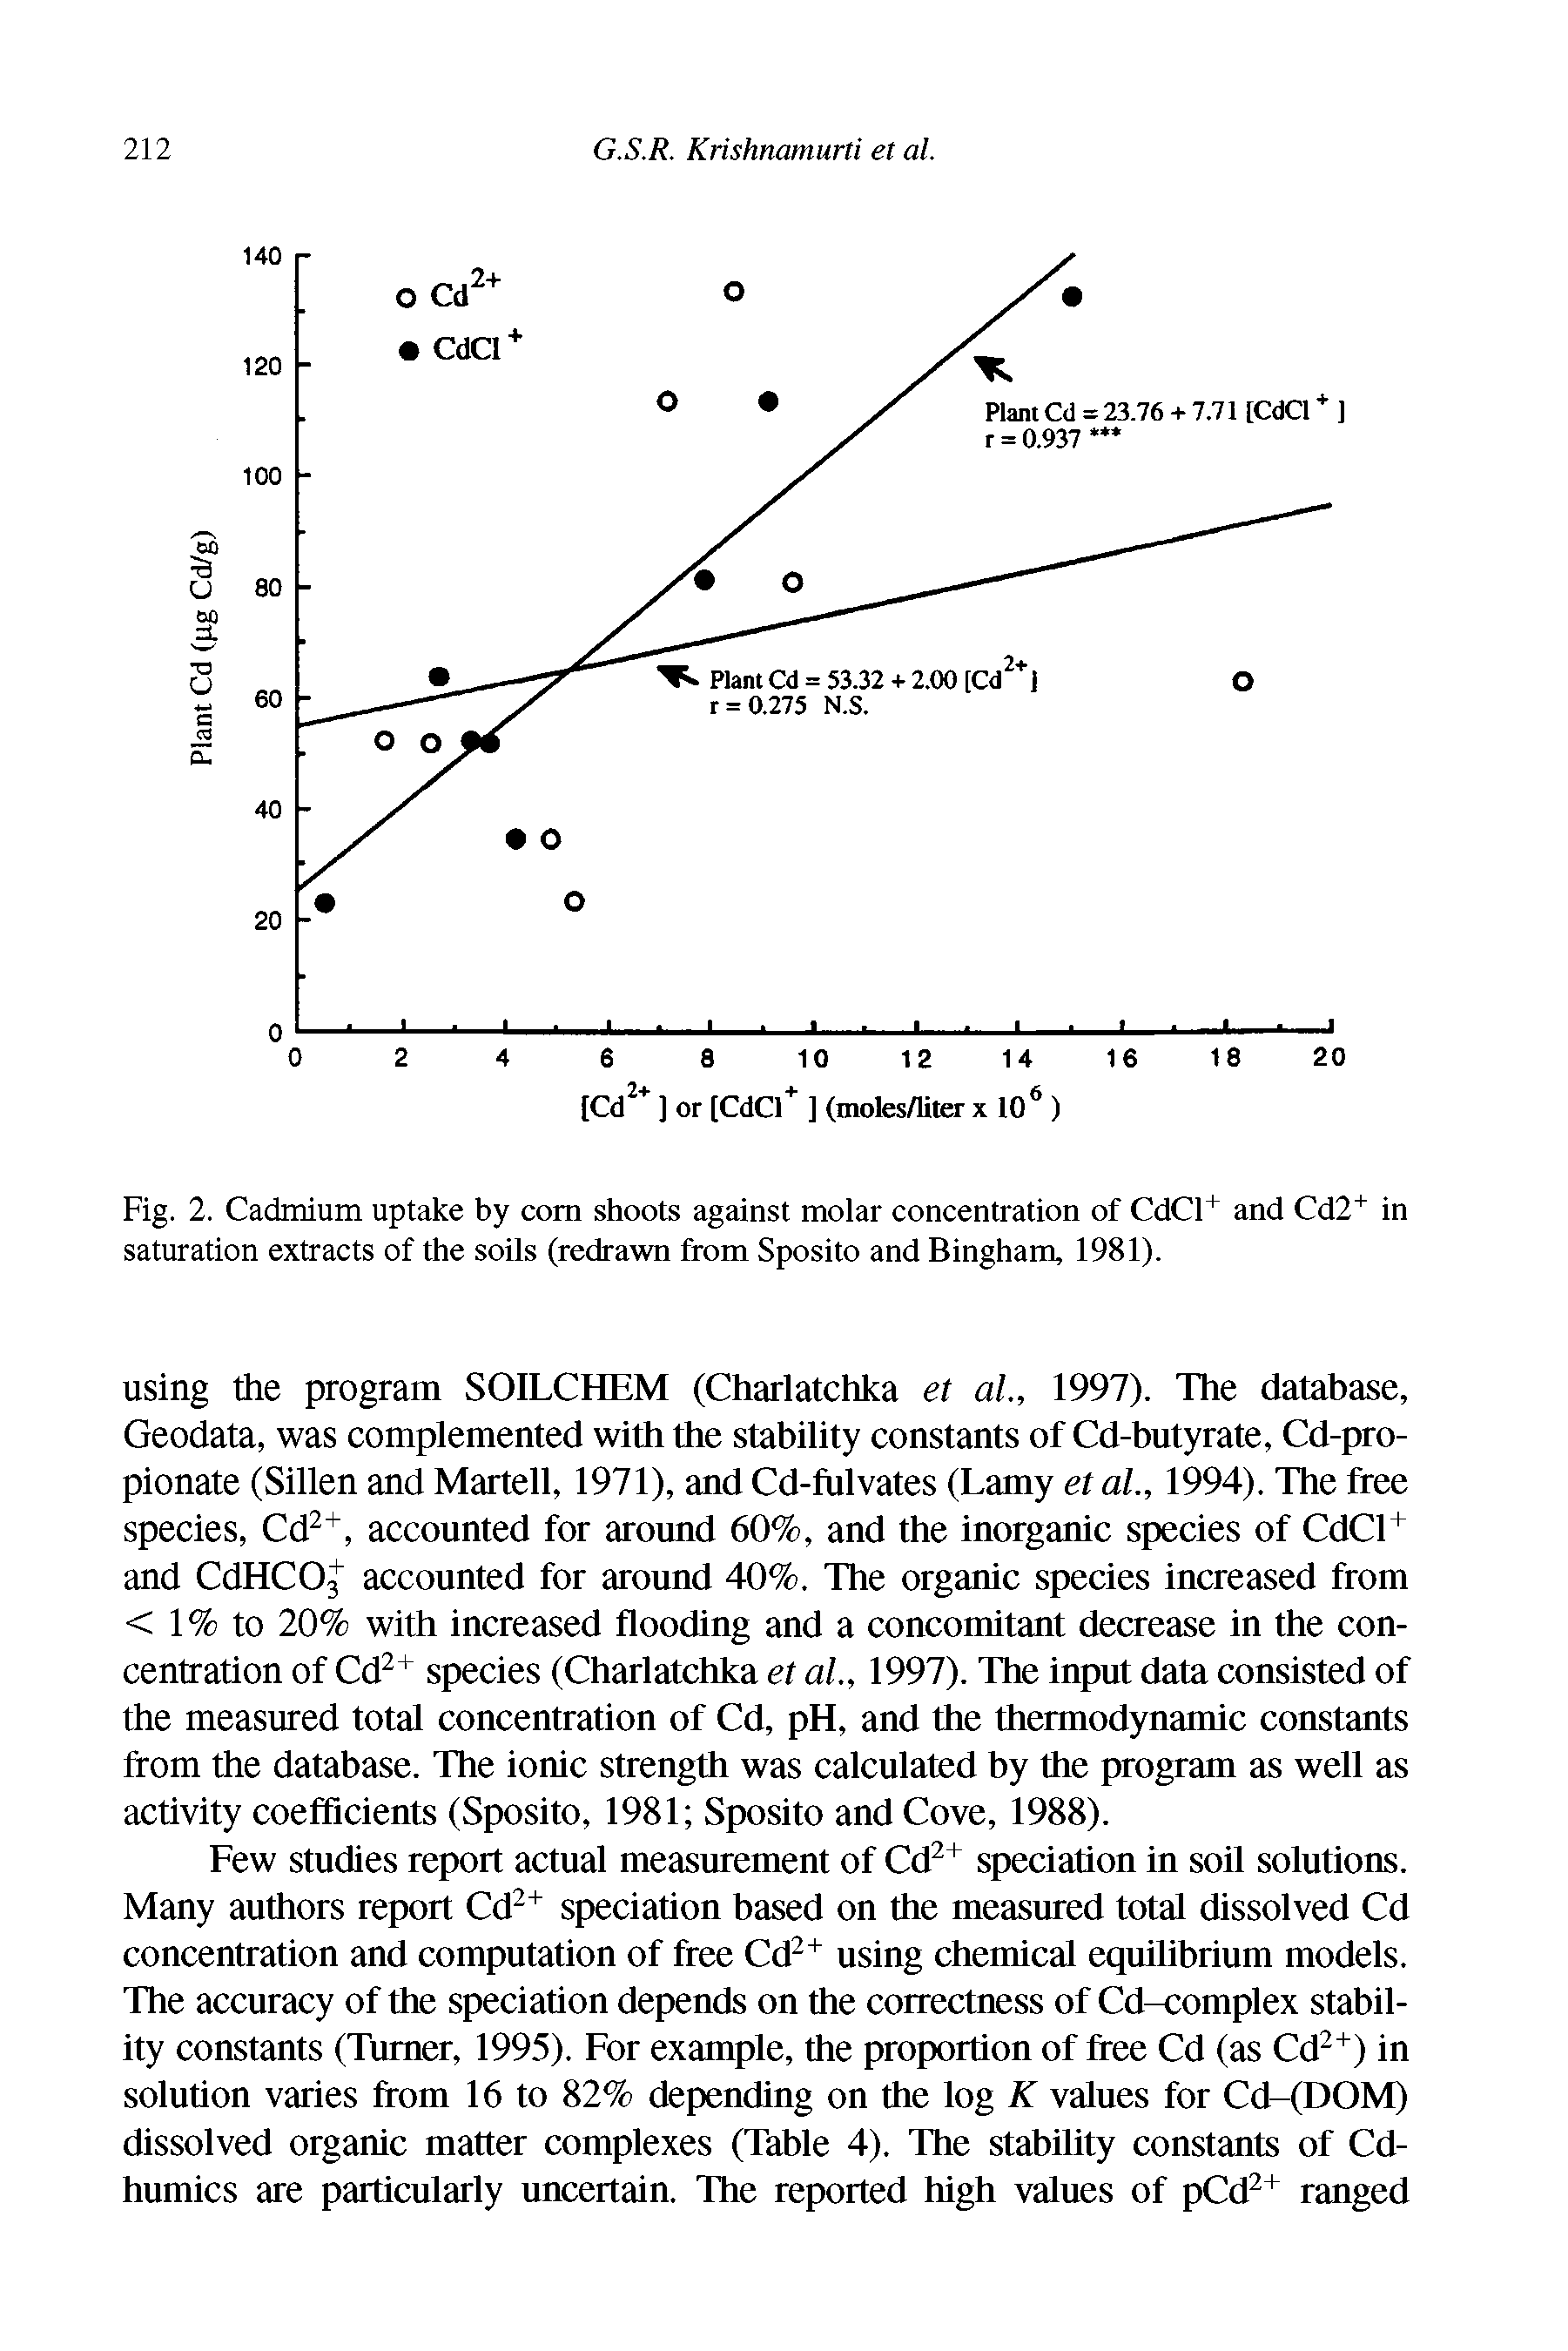 Fig. 2. Cadmium uptake by com shoots against molar concentration of CdCC and Cd2 in saturation extracts of the soils (redrawn from Sposito and Bingham, 1981).